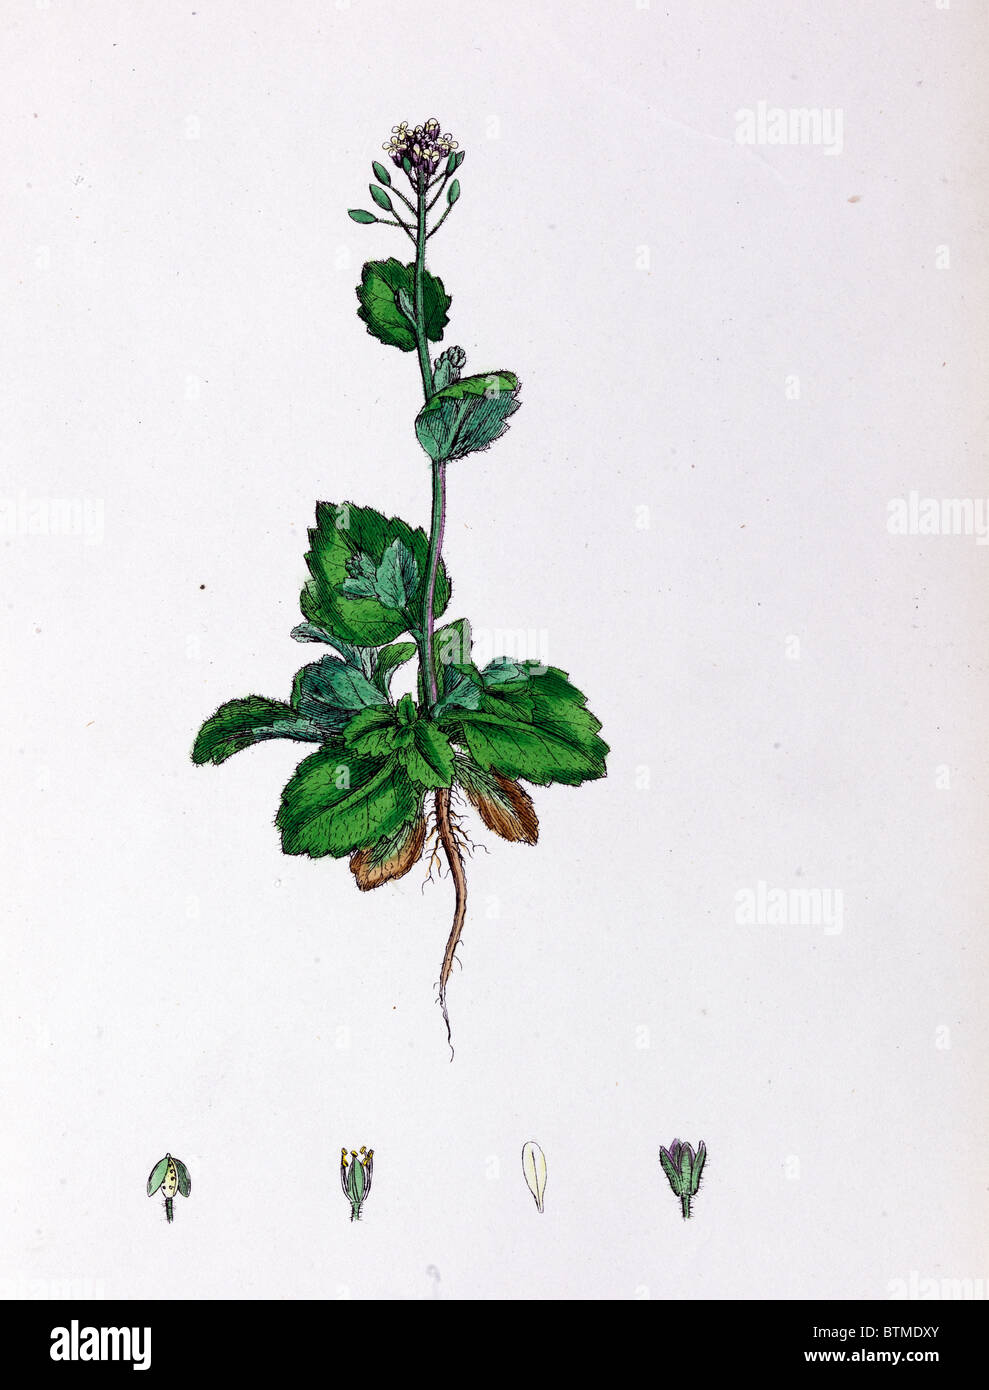 Botanical Print,Speedwell Leaved Whitlow Grass, 19th century Stock Photo